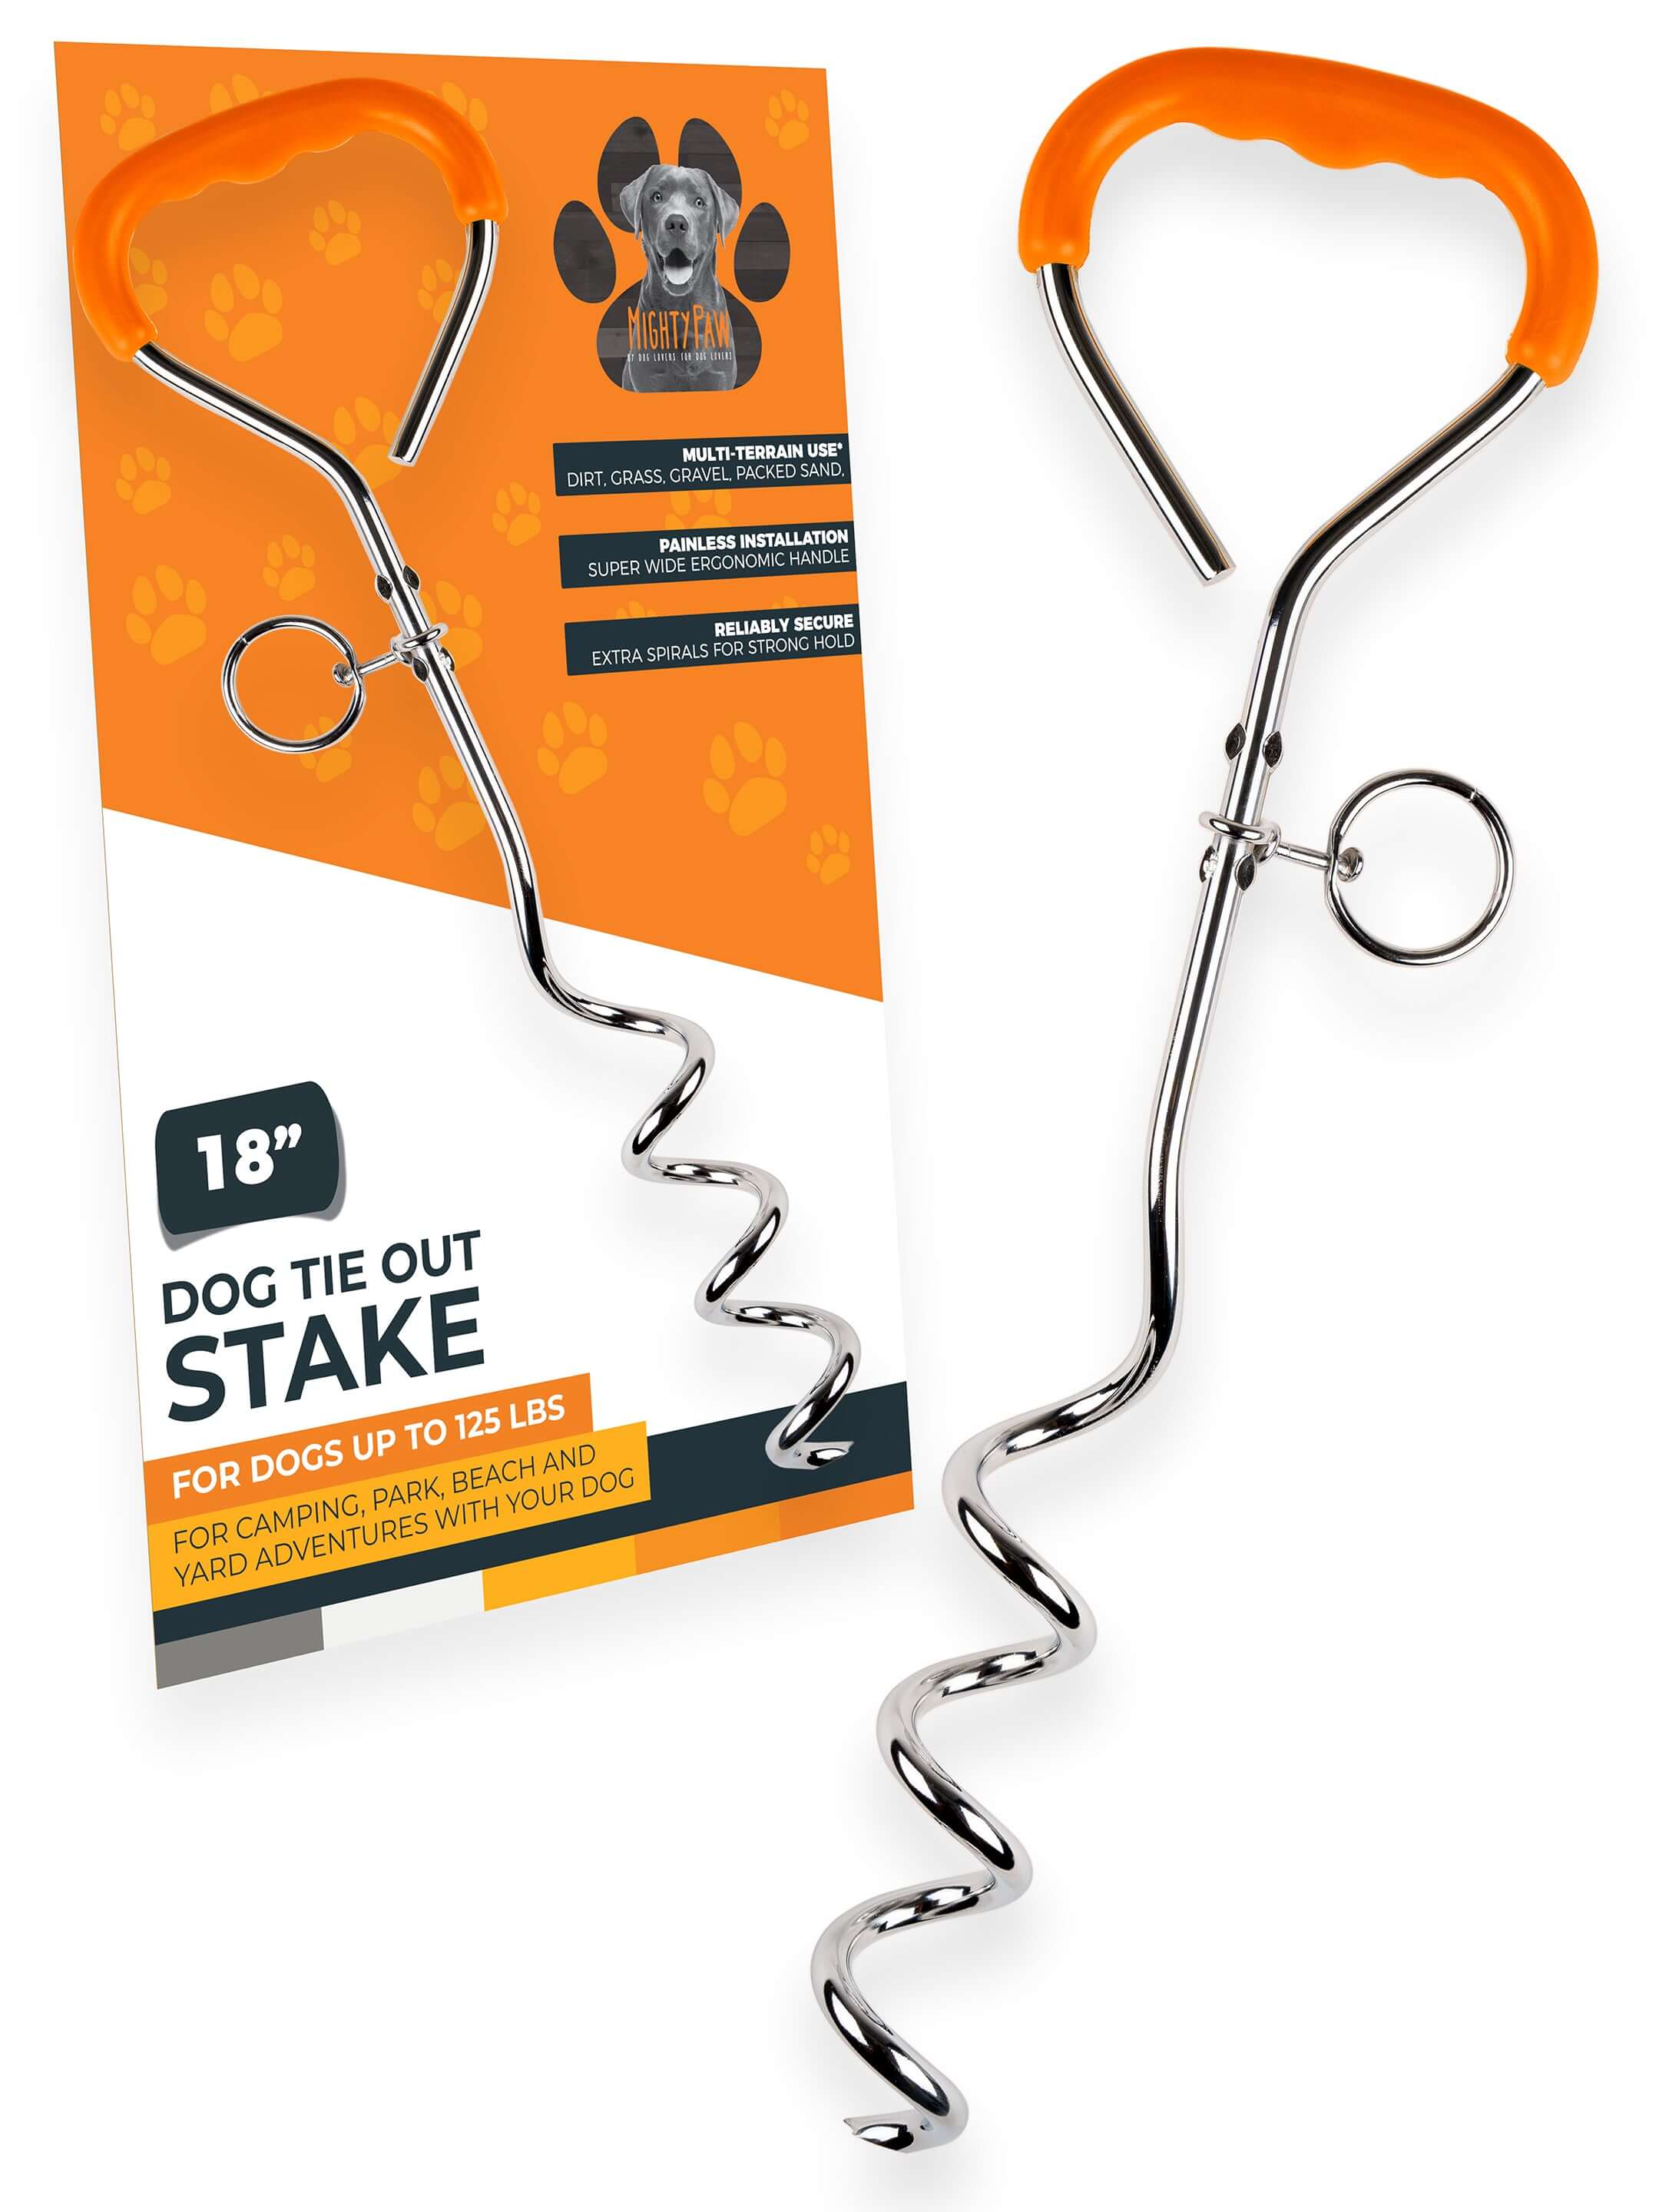 Mighty Paw Dog Tie Out Stake